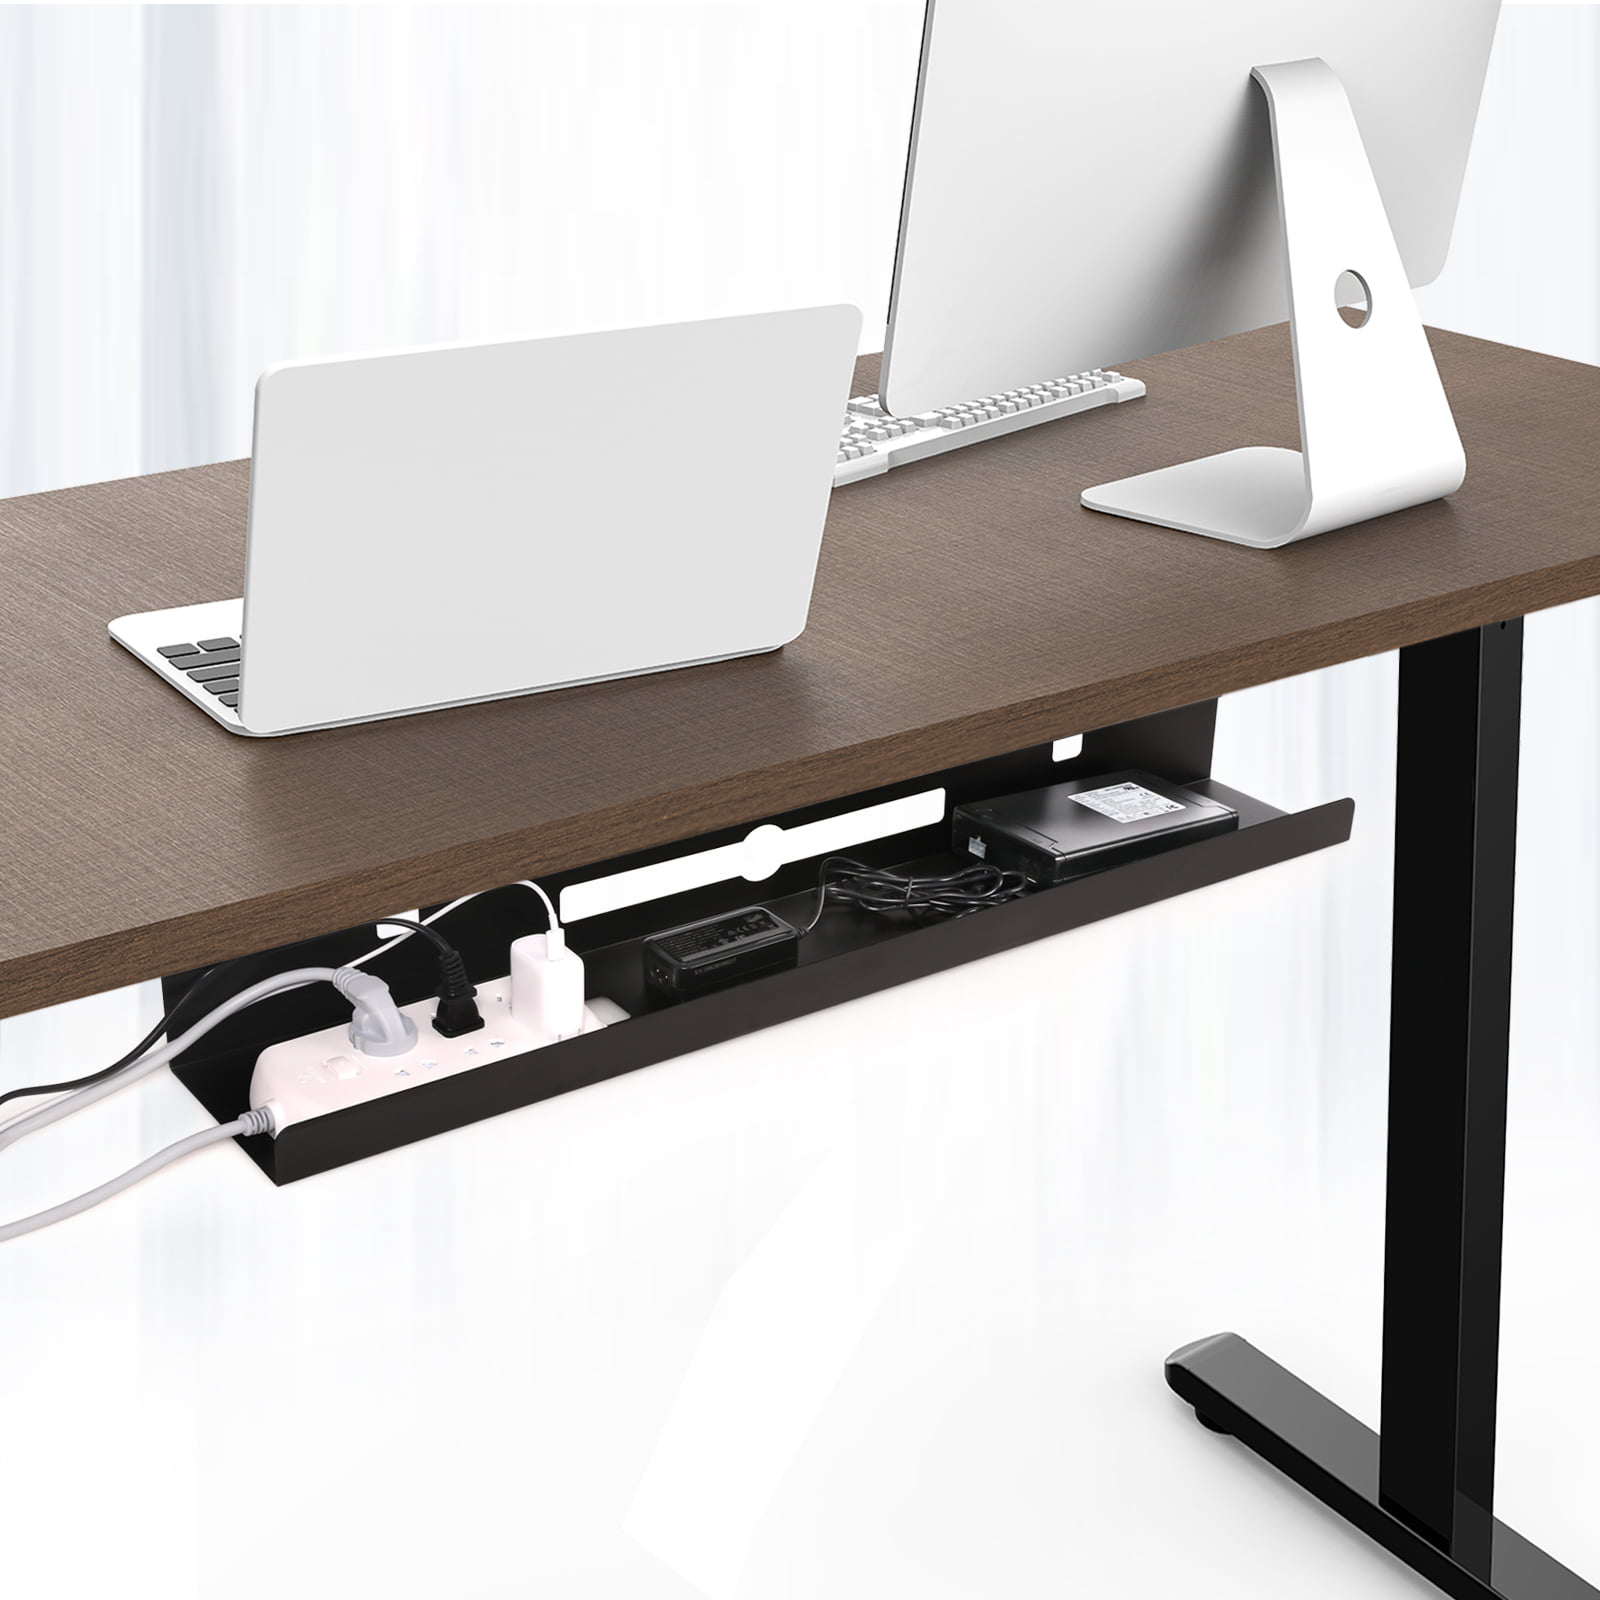 Motion Under Desk Cord Organizer Cable Tray White / I CAN WAIT